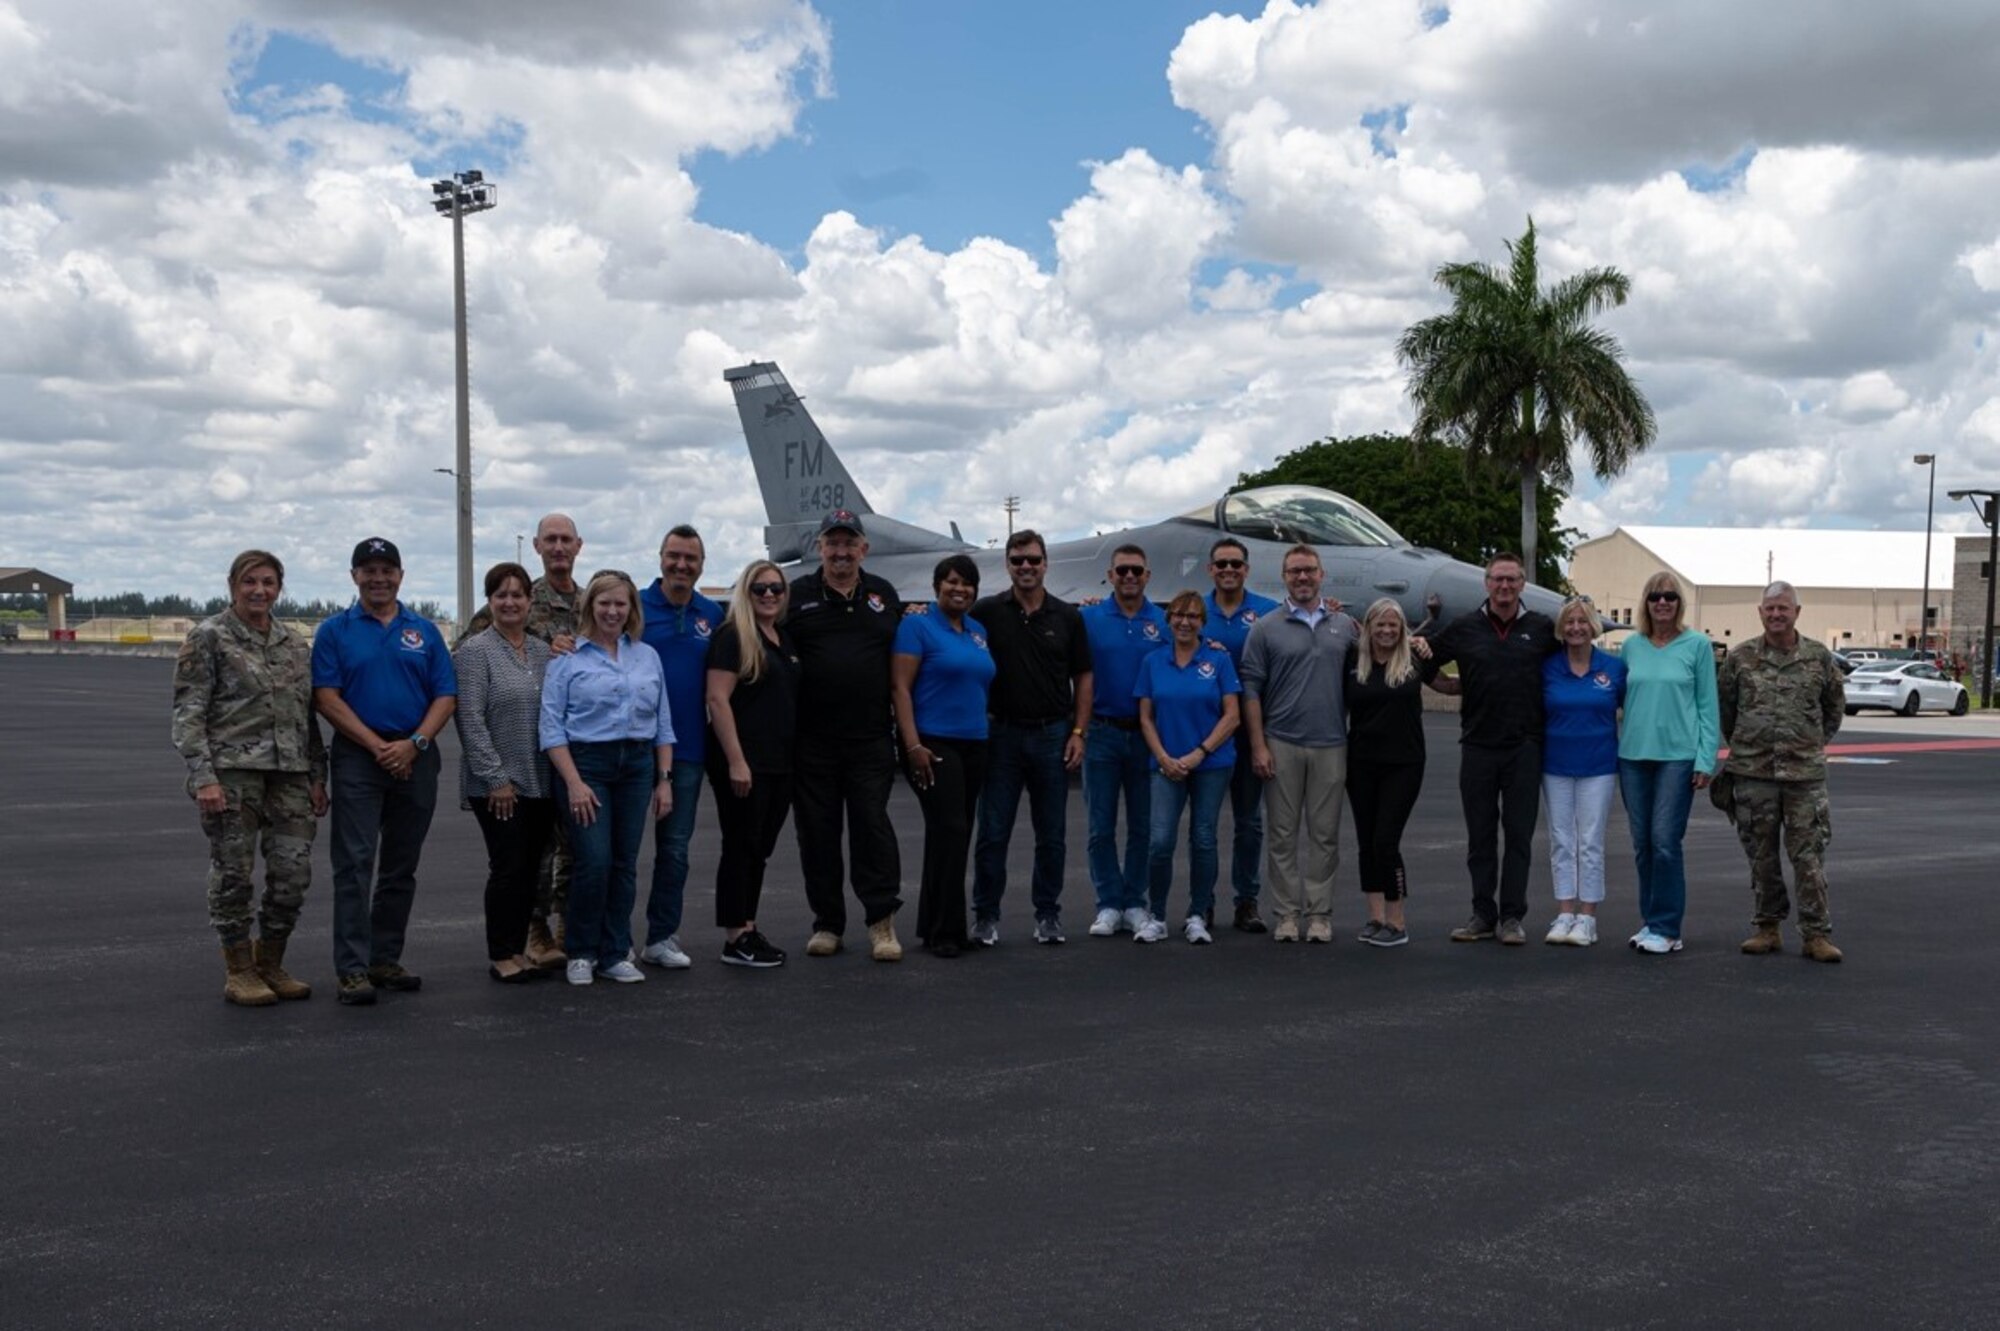 Sixteen Tampa honorary commanders and civic leaders from the 927th Air Refueling Wing, MacDill Air Force Base, Florida, flew across the state to tour Homestead Air Reserve Base, Florida, May 12, 2022. During the flight to Homestead ARB, the honorary commanders were able to view three F-16C Fighting Falcon fighter aircraft from the 482nd Fighter Wing being refueled by a KC-135 Stratotanker aircraft from the 927th ARW. (U.S. Air Force Photo by Staff Sgt. Alexis Suarez)